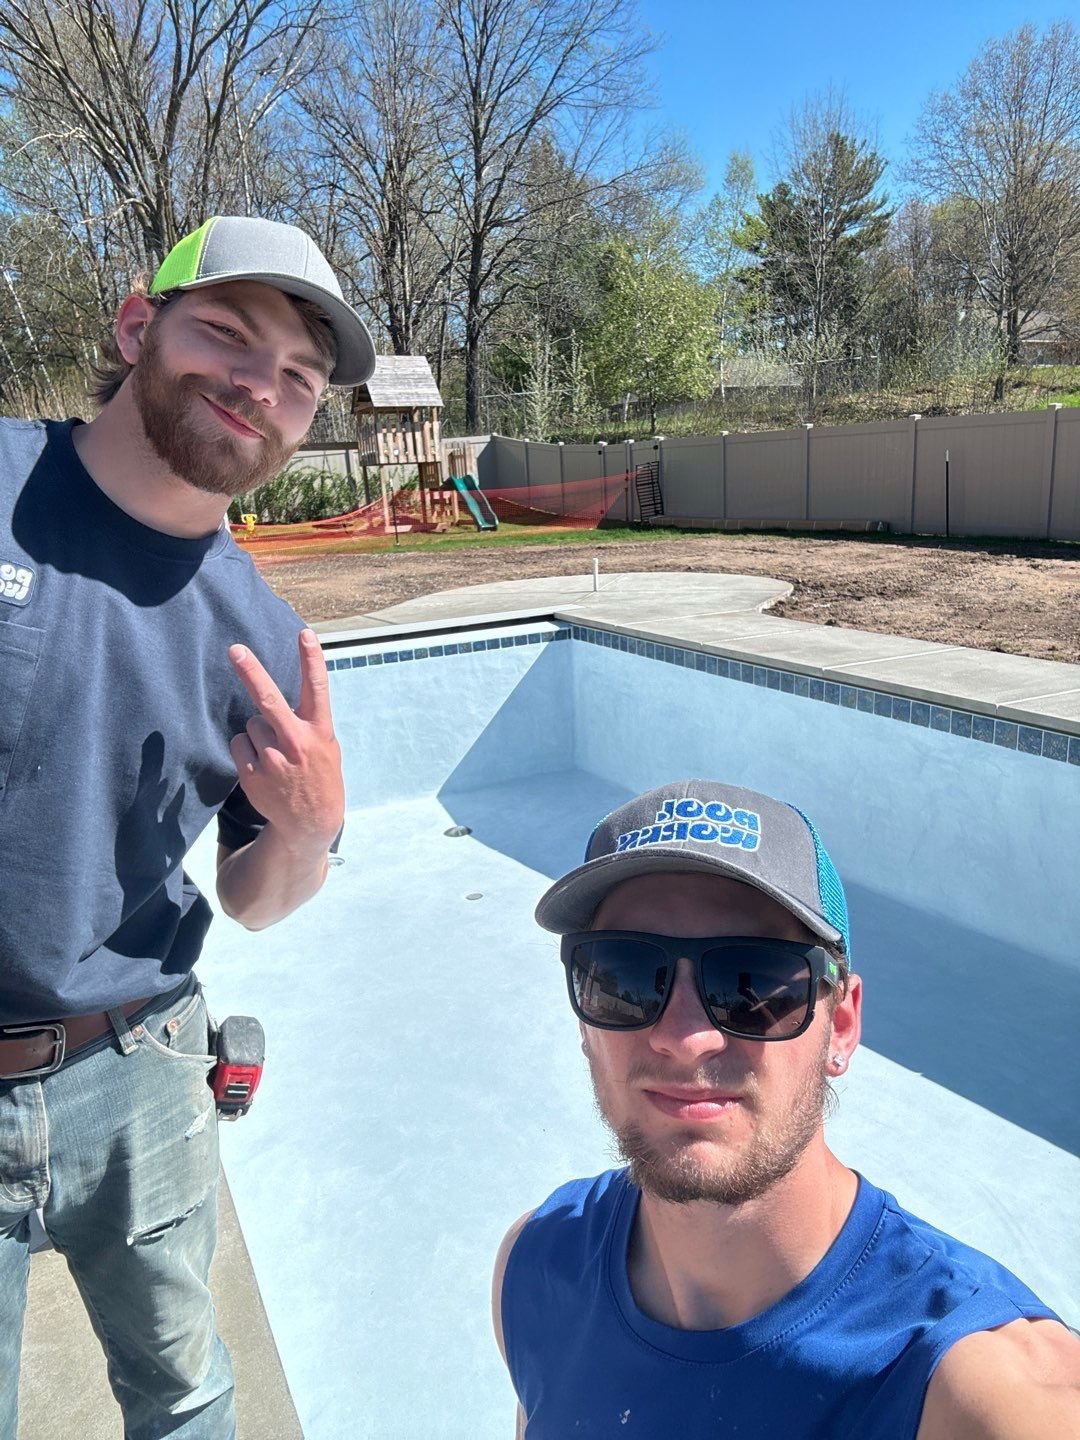 It's time for another SELFIE SATURDAY! Cole &amp; Tyler were certainly enjoying the long awaited sunshine!!!!

We want to see YOU (our wonderful customers) and how you are all enjoying your pool, spa or just your weekend! Best picture of the week win